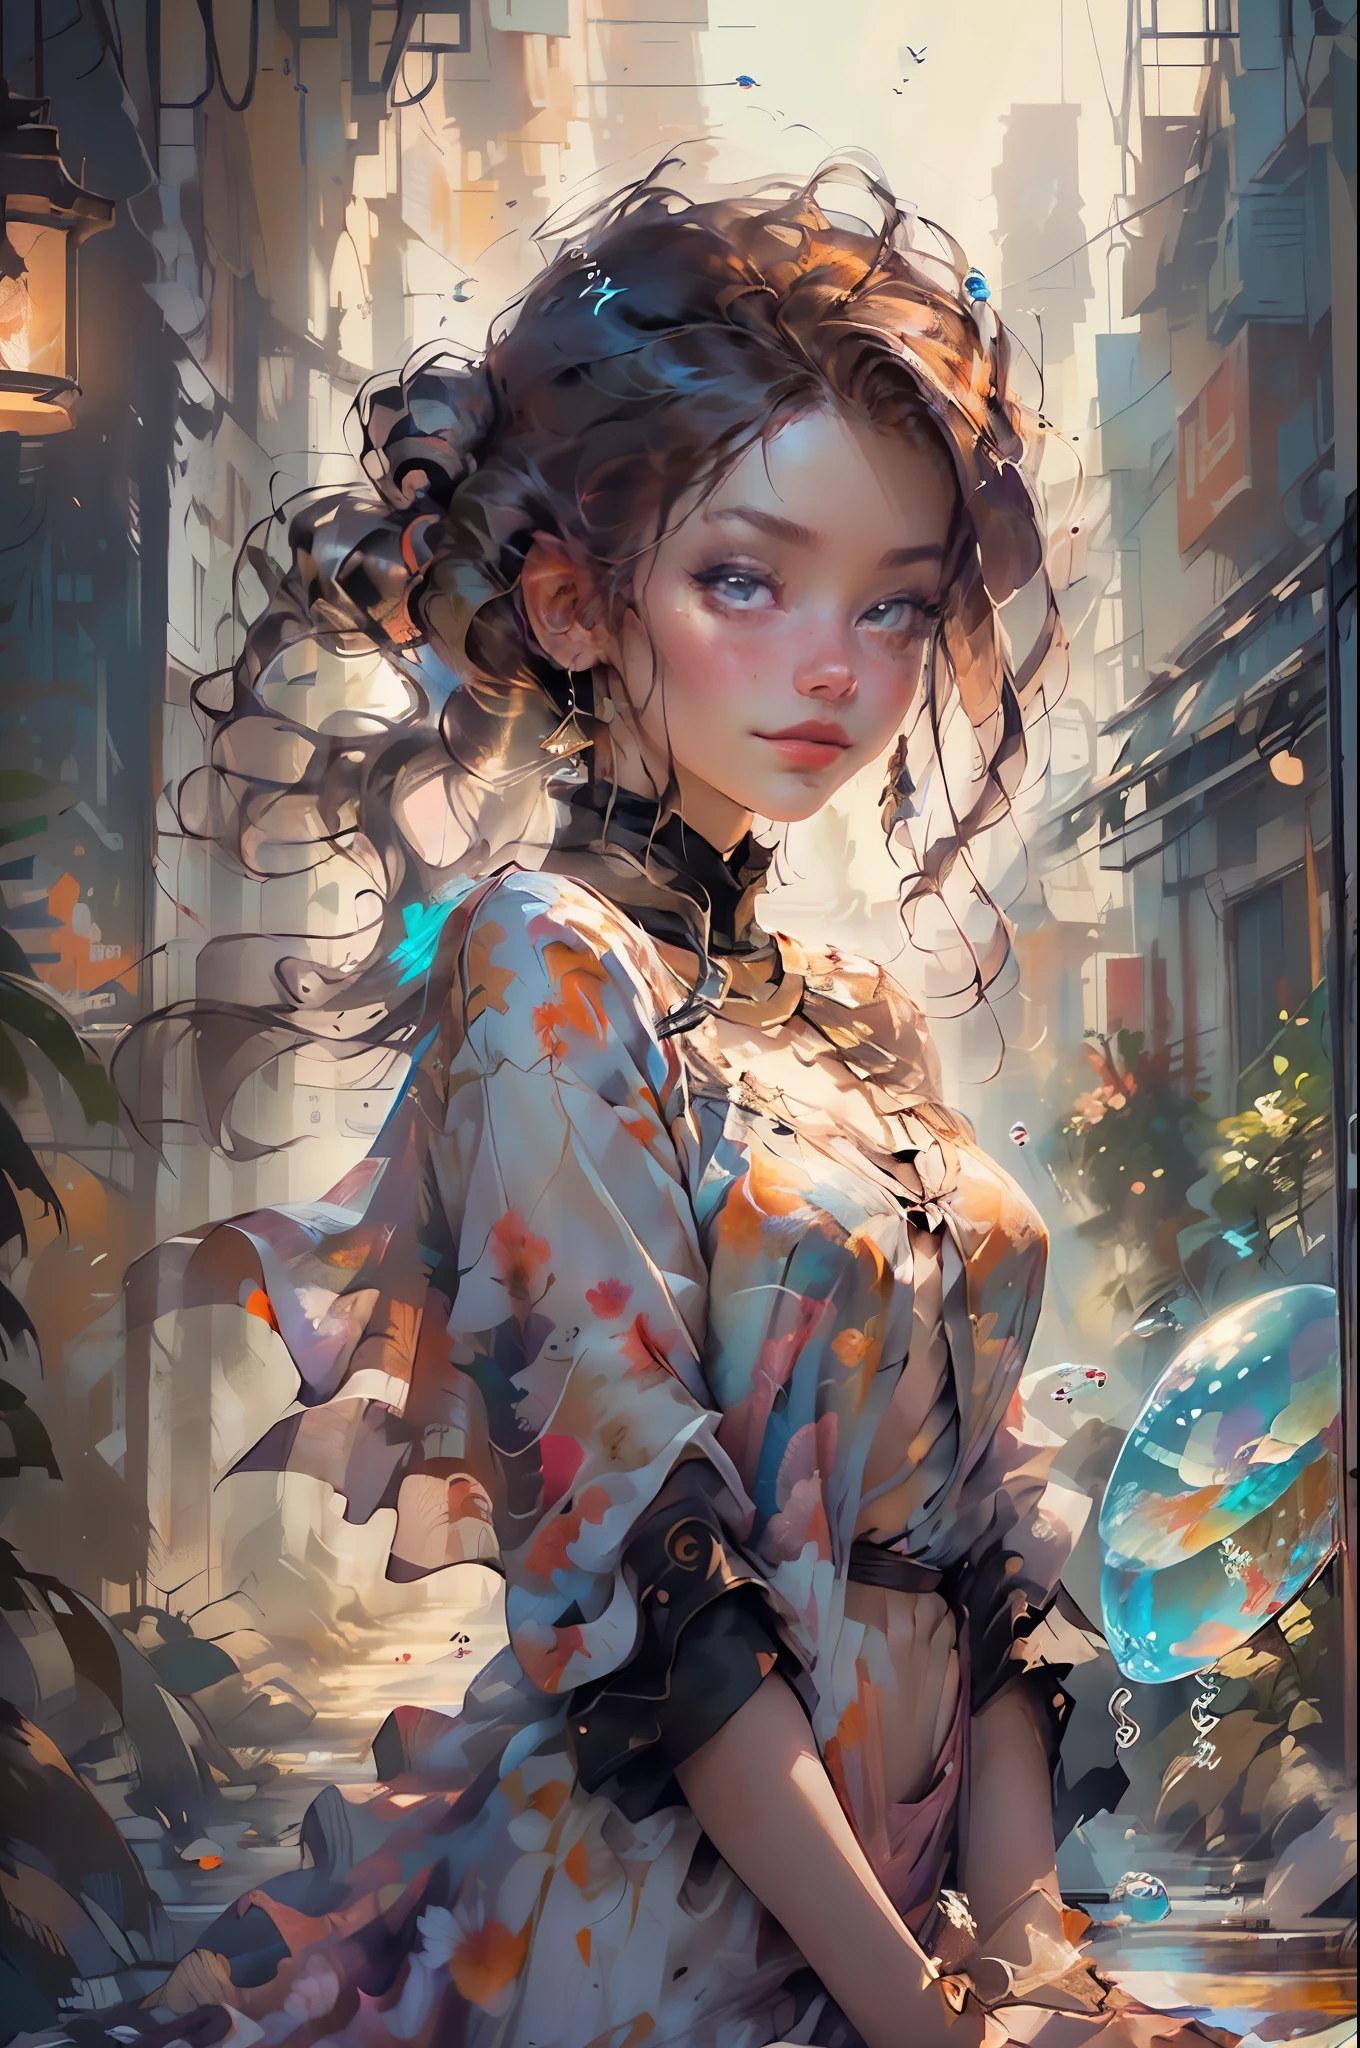 (cropped profile photo), ((1 beautiful young woman inside a soap bubble: 1.5)), sitting on a pink pillow, ((flying through a beautiful and magical fairy tale city: 1.4)), (hyper detailed : 1.3), ((clothing delicate dress with floral ornaments: 1.4)), ((sunset background below a beautiful fairy tale landscape: 1.3)), ((imaginative scene)), ((Perfect faces and bodies, meticulously detailed: 1.3)), ((long shot: 1.4)),((Best Quality)), ((Masterpiece)), 3D, (((sunset:1.2))), (photorealistic:1.4), ((frontal camera)), (smiling happily, with hands resting inside the soap bubble, surprised by the beautiful fairy city:1.4), ((film lighting: 1.2)), 32k.